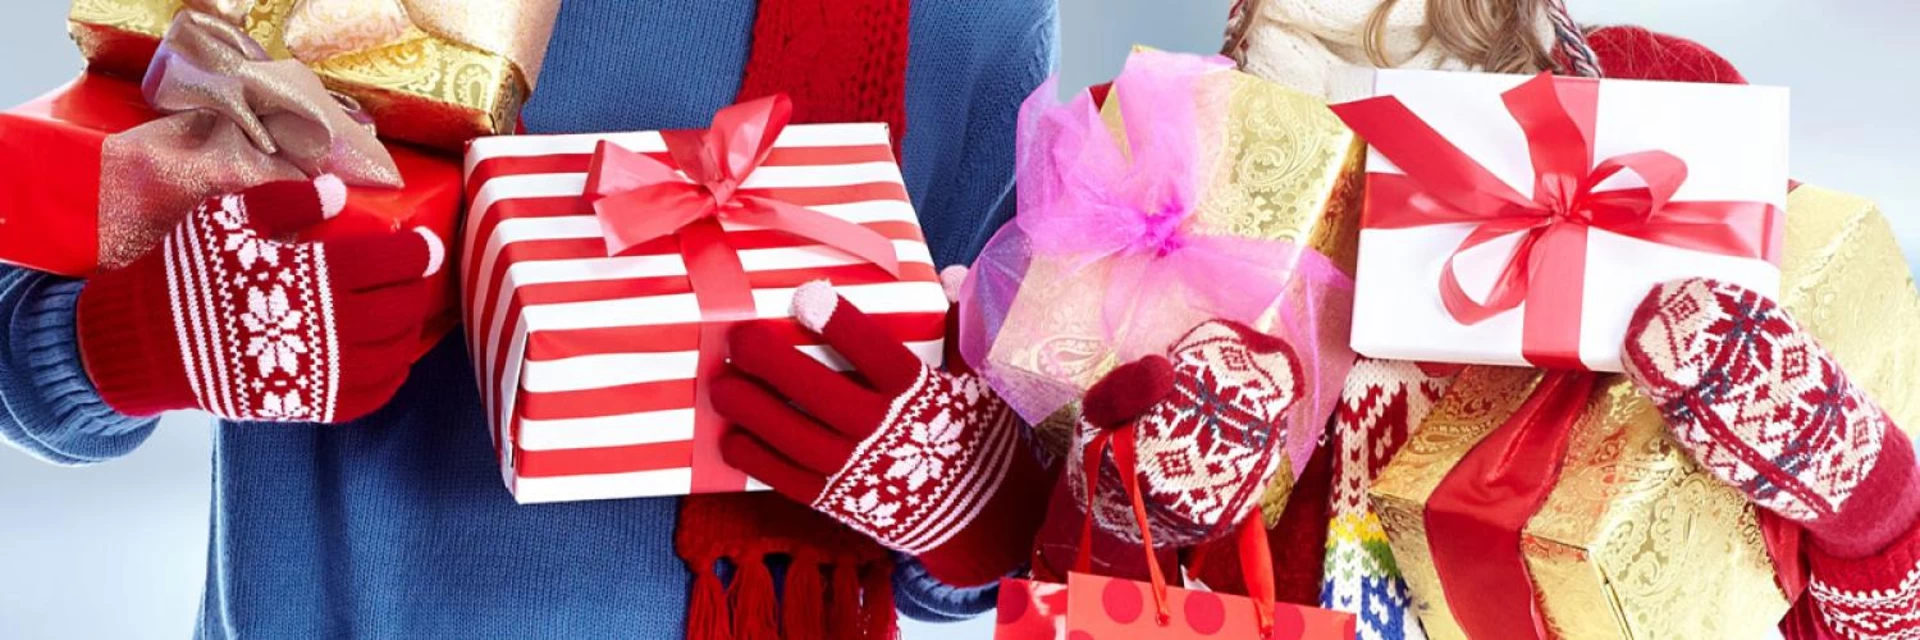 SCORE HOT DEALS ON GIFTS WITH YOUR AAA MEMBERSHIP